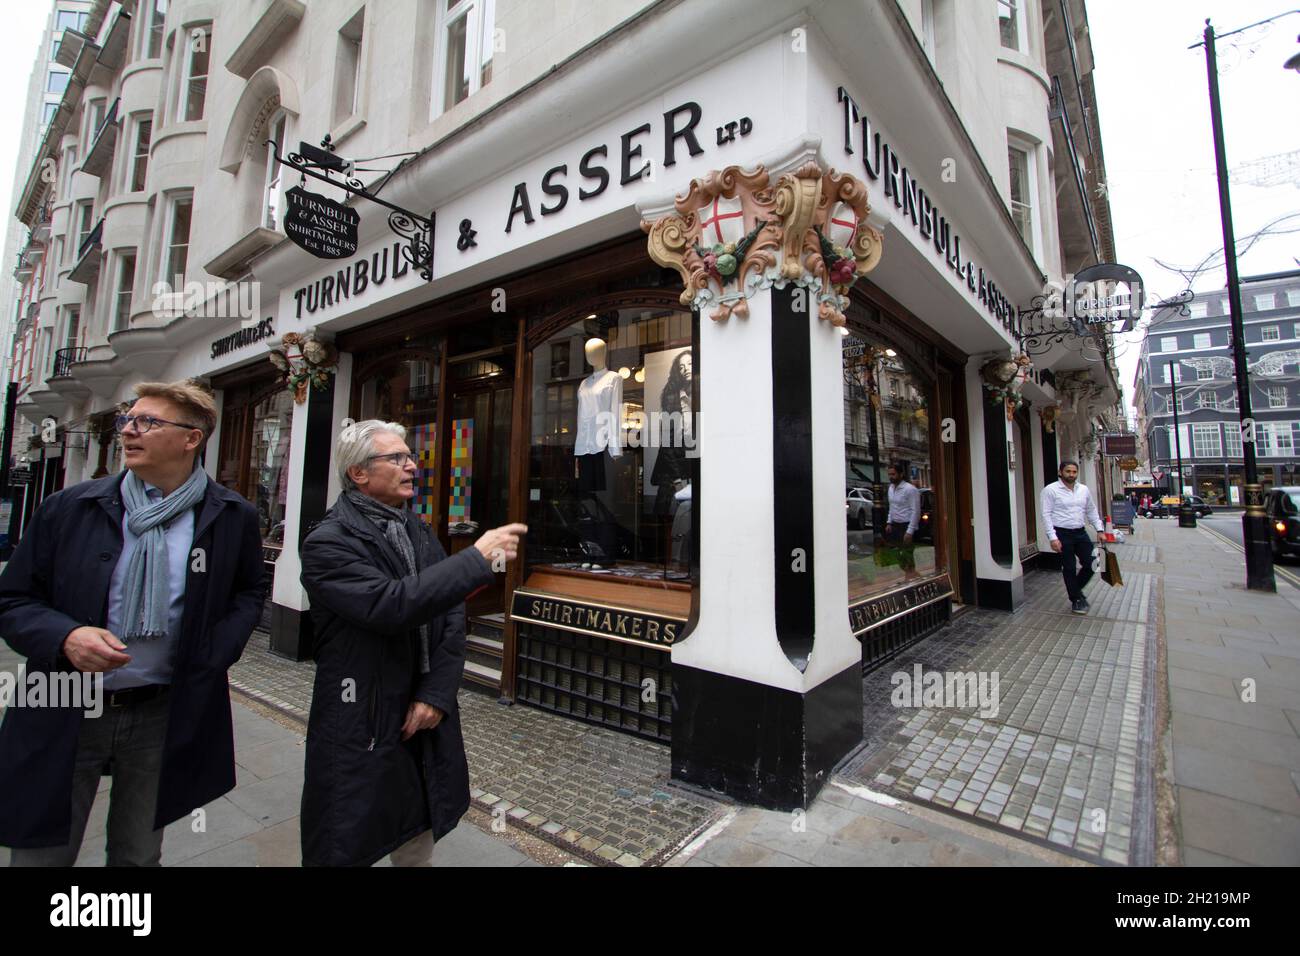 Asser and Turnbull is a bespoke shirtmaker established in 1885 Stock Photo